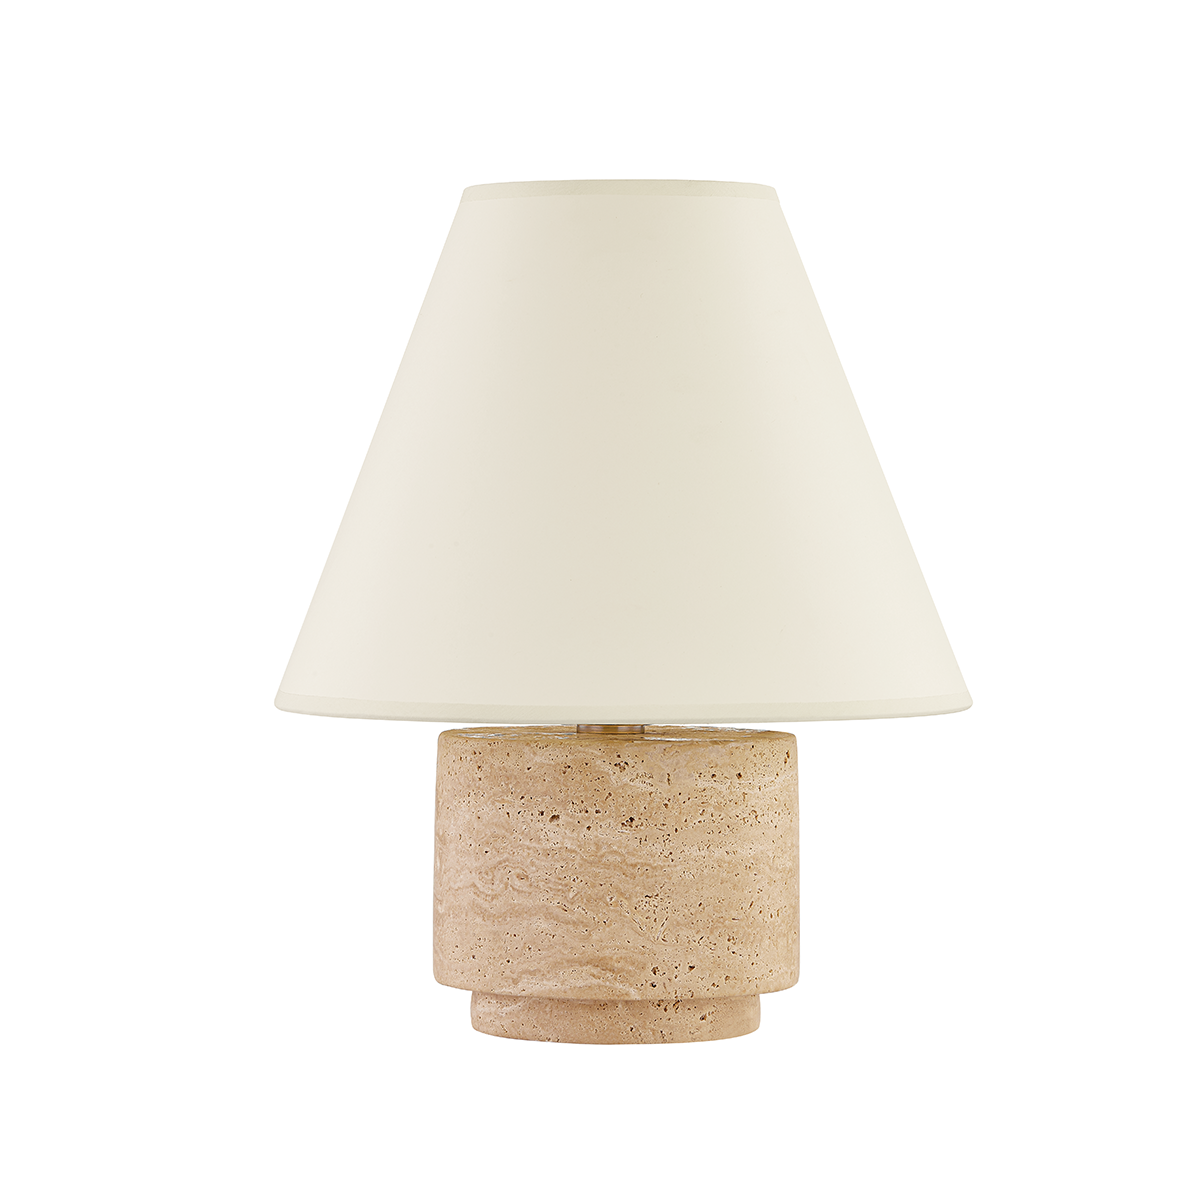 Troy Lighting BRONTE Table Lamp Table Lamp Troy Lighting PATINA BRASS 12x12x14.5 